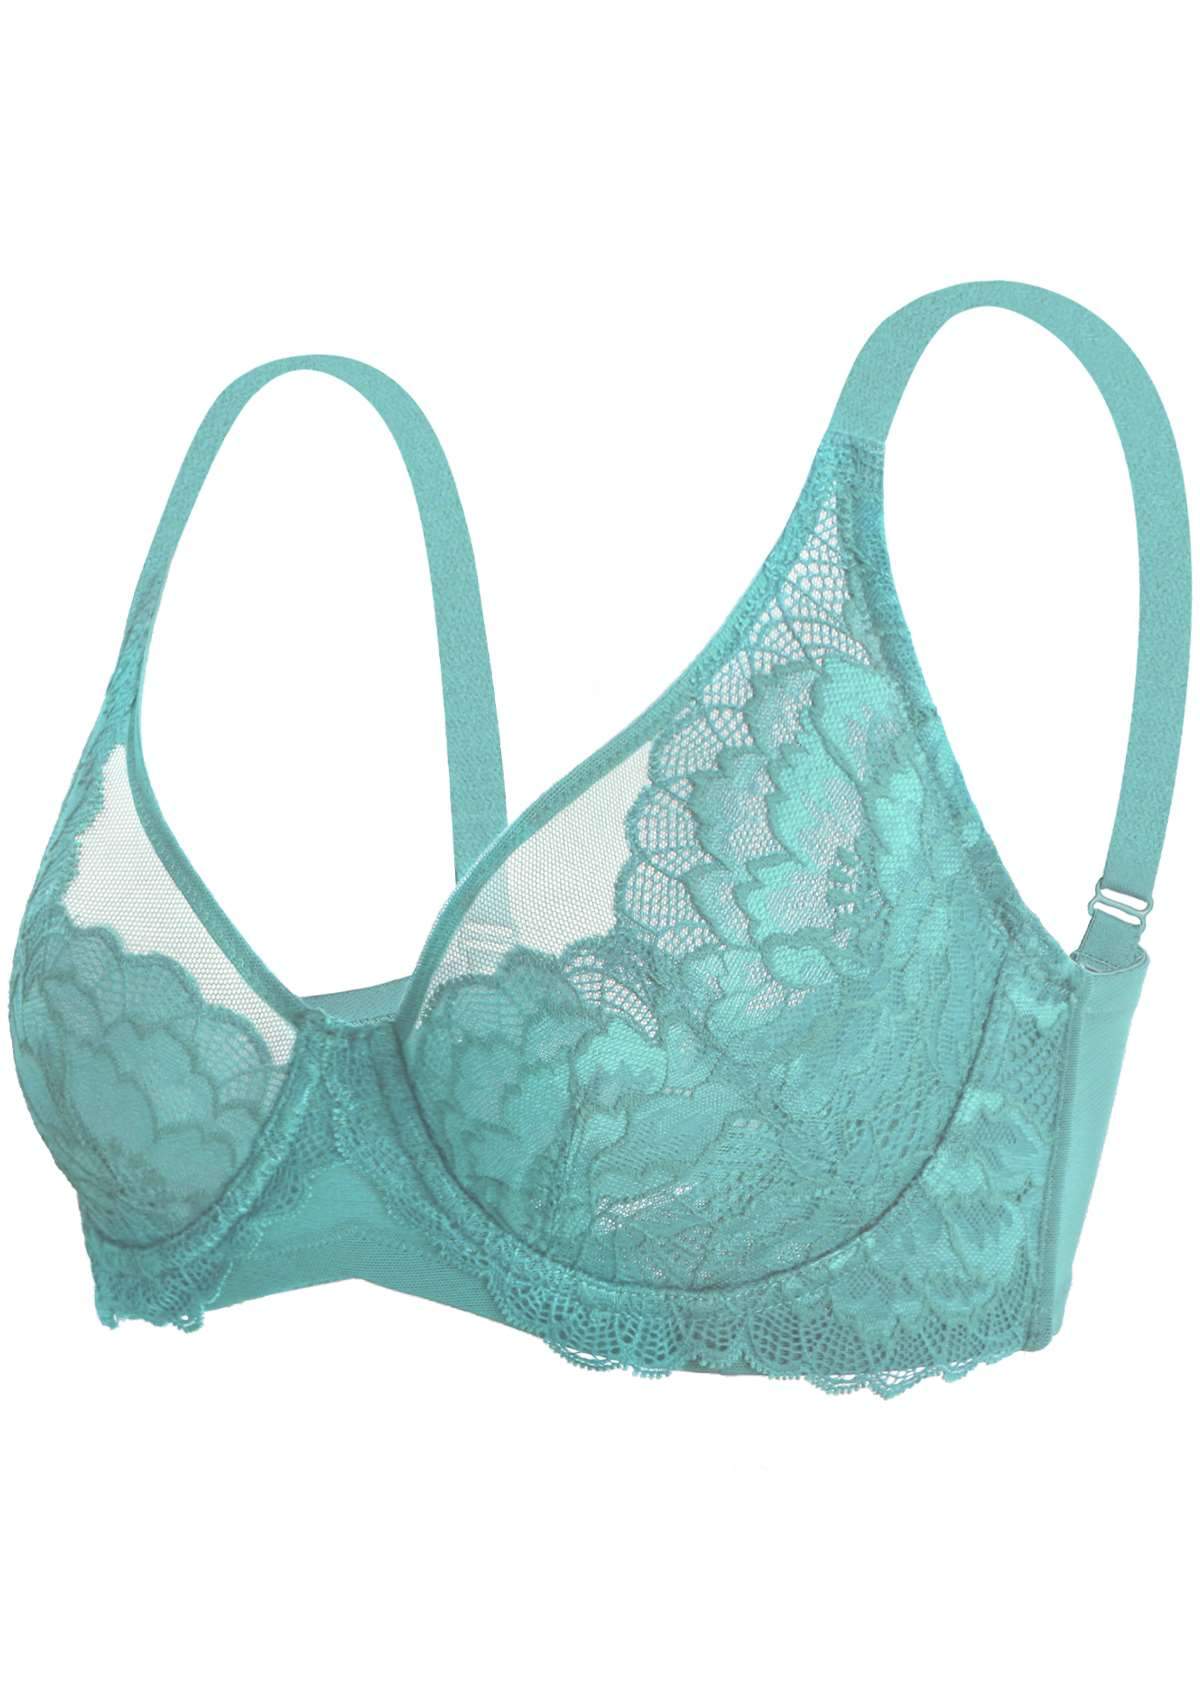 HSIA Peony Lace Unlined Supportive Underwire Bra - Green / 34 / D